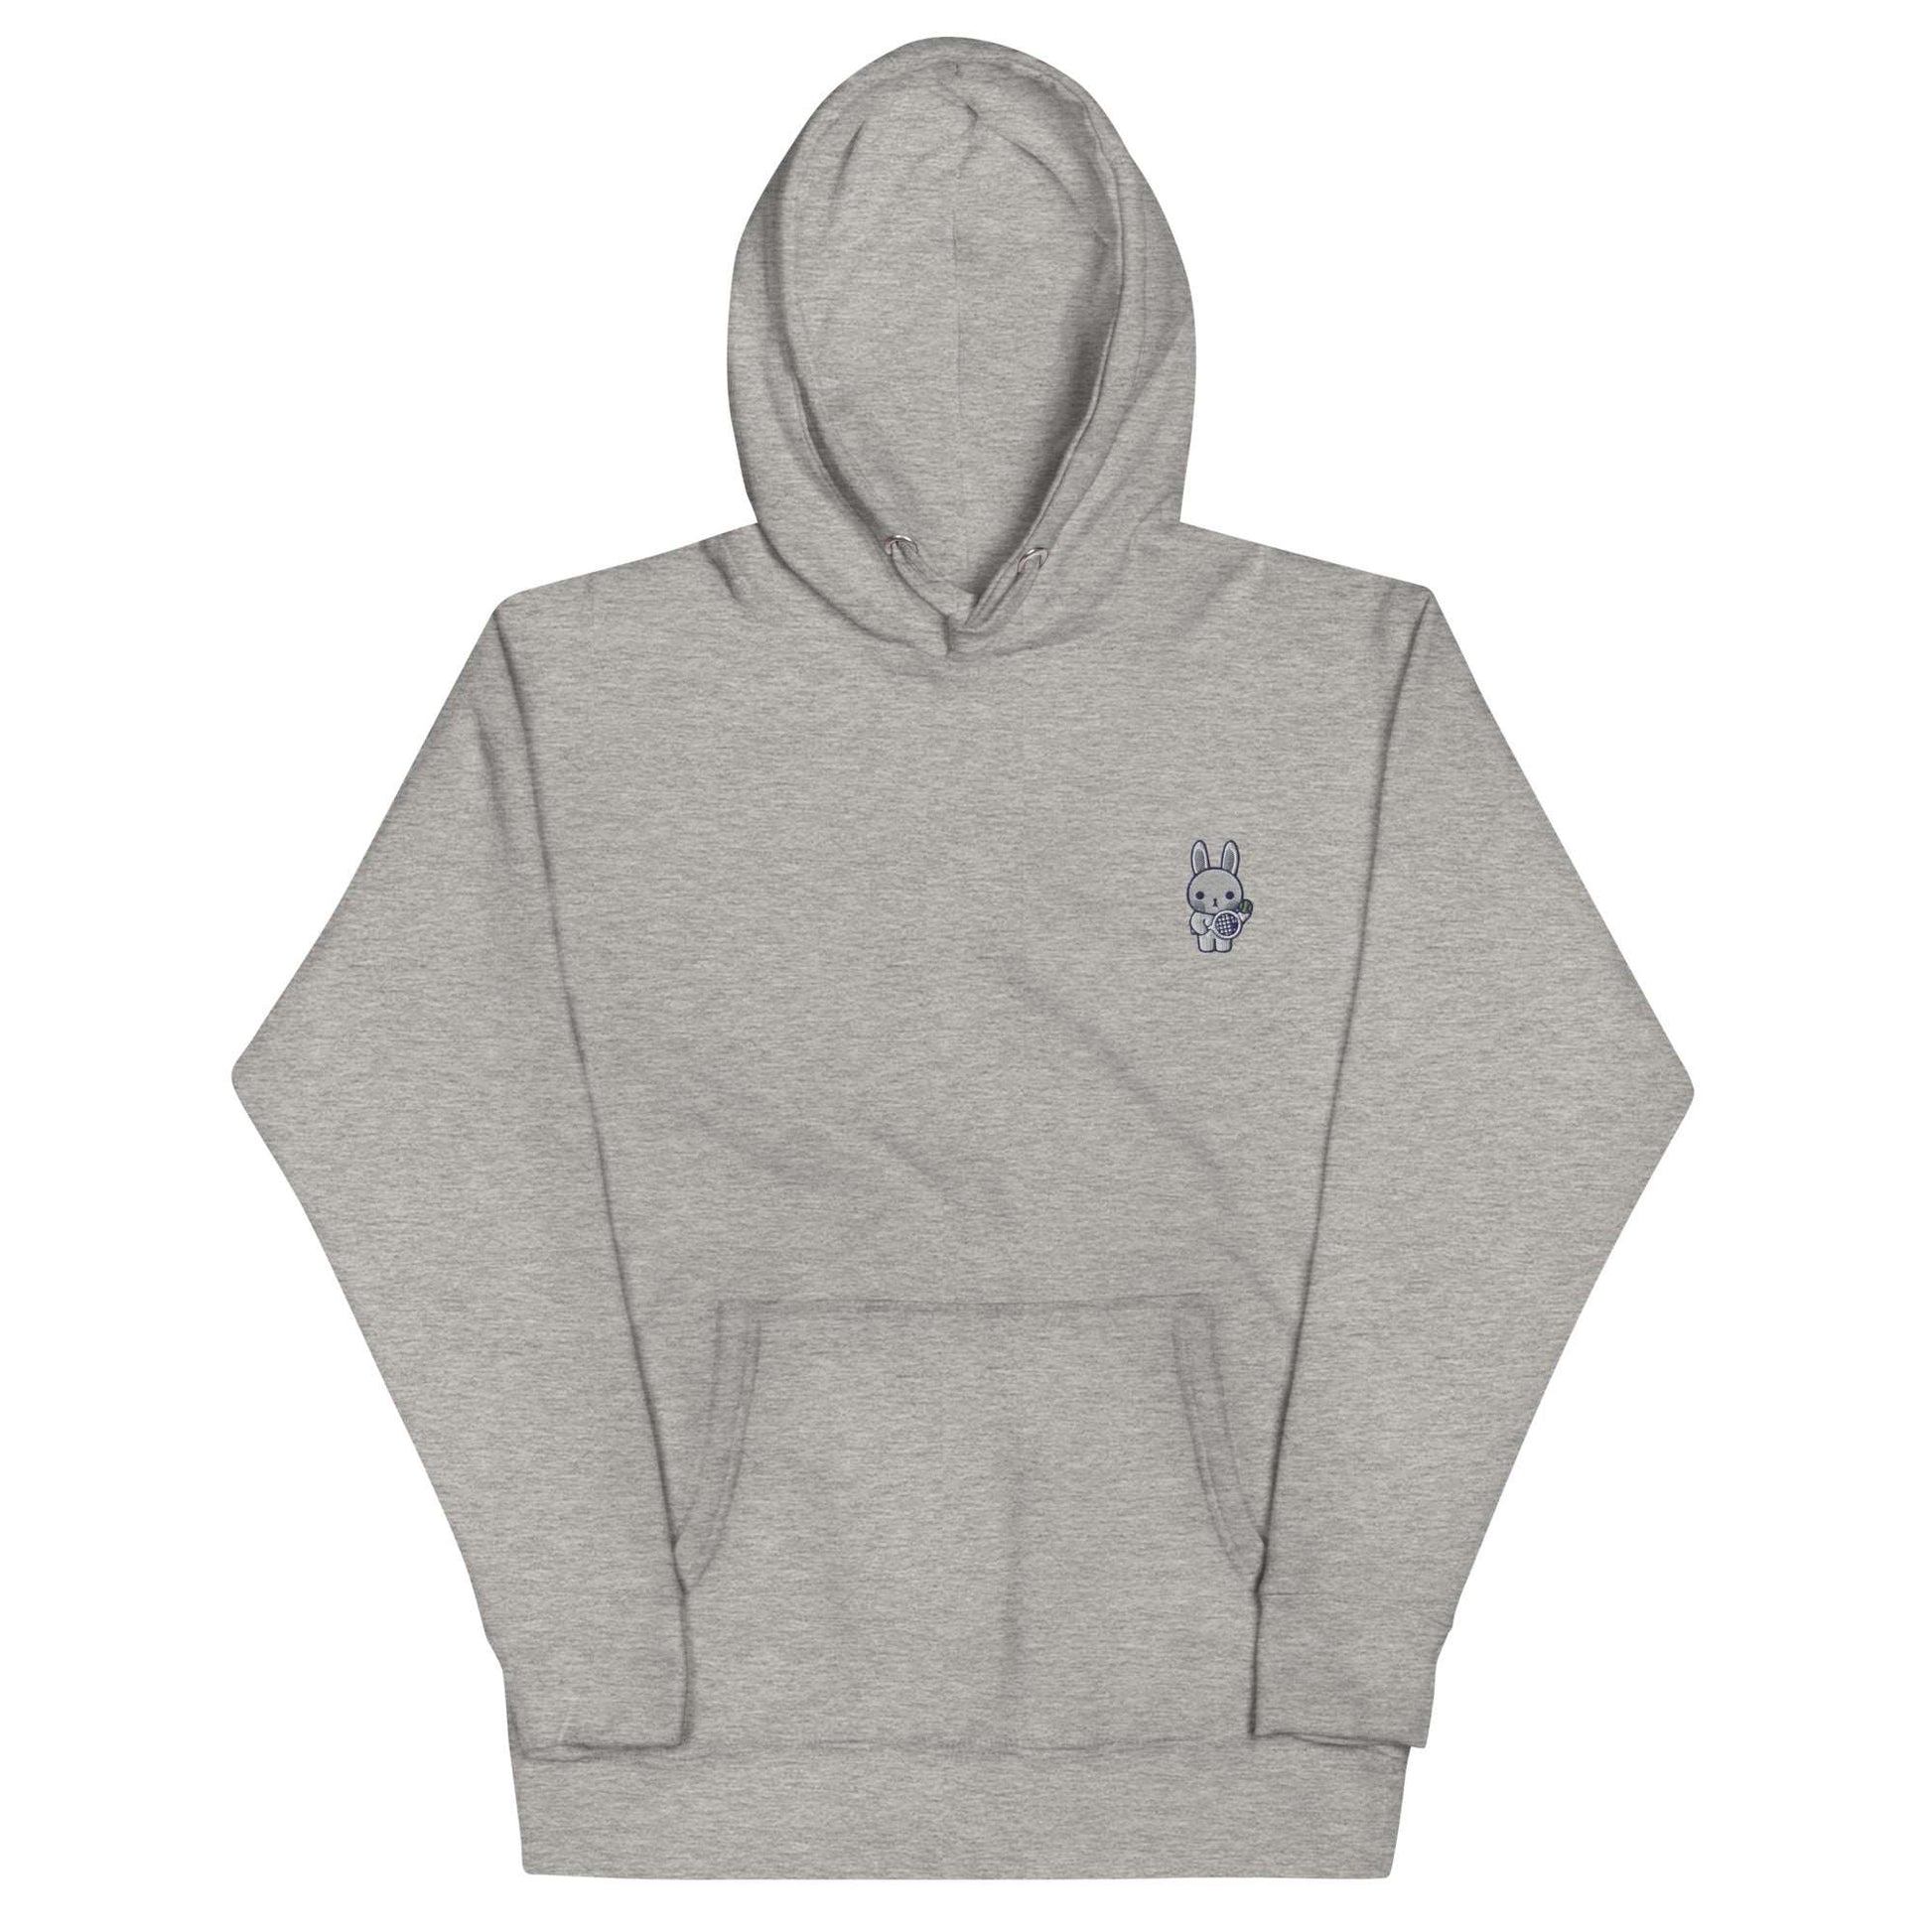 ADULT UNISEX EMMA HOODIE - EMBROIDERED LOGO - AVAILABLE IN 10 COLORS - TOKKITENNIS